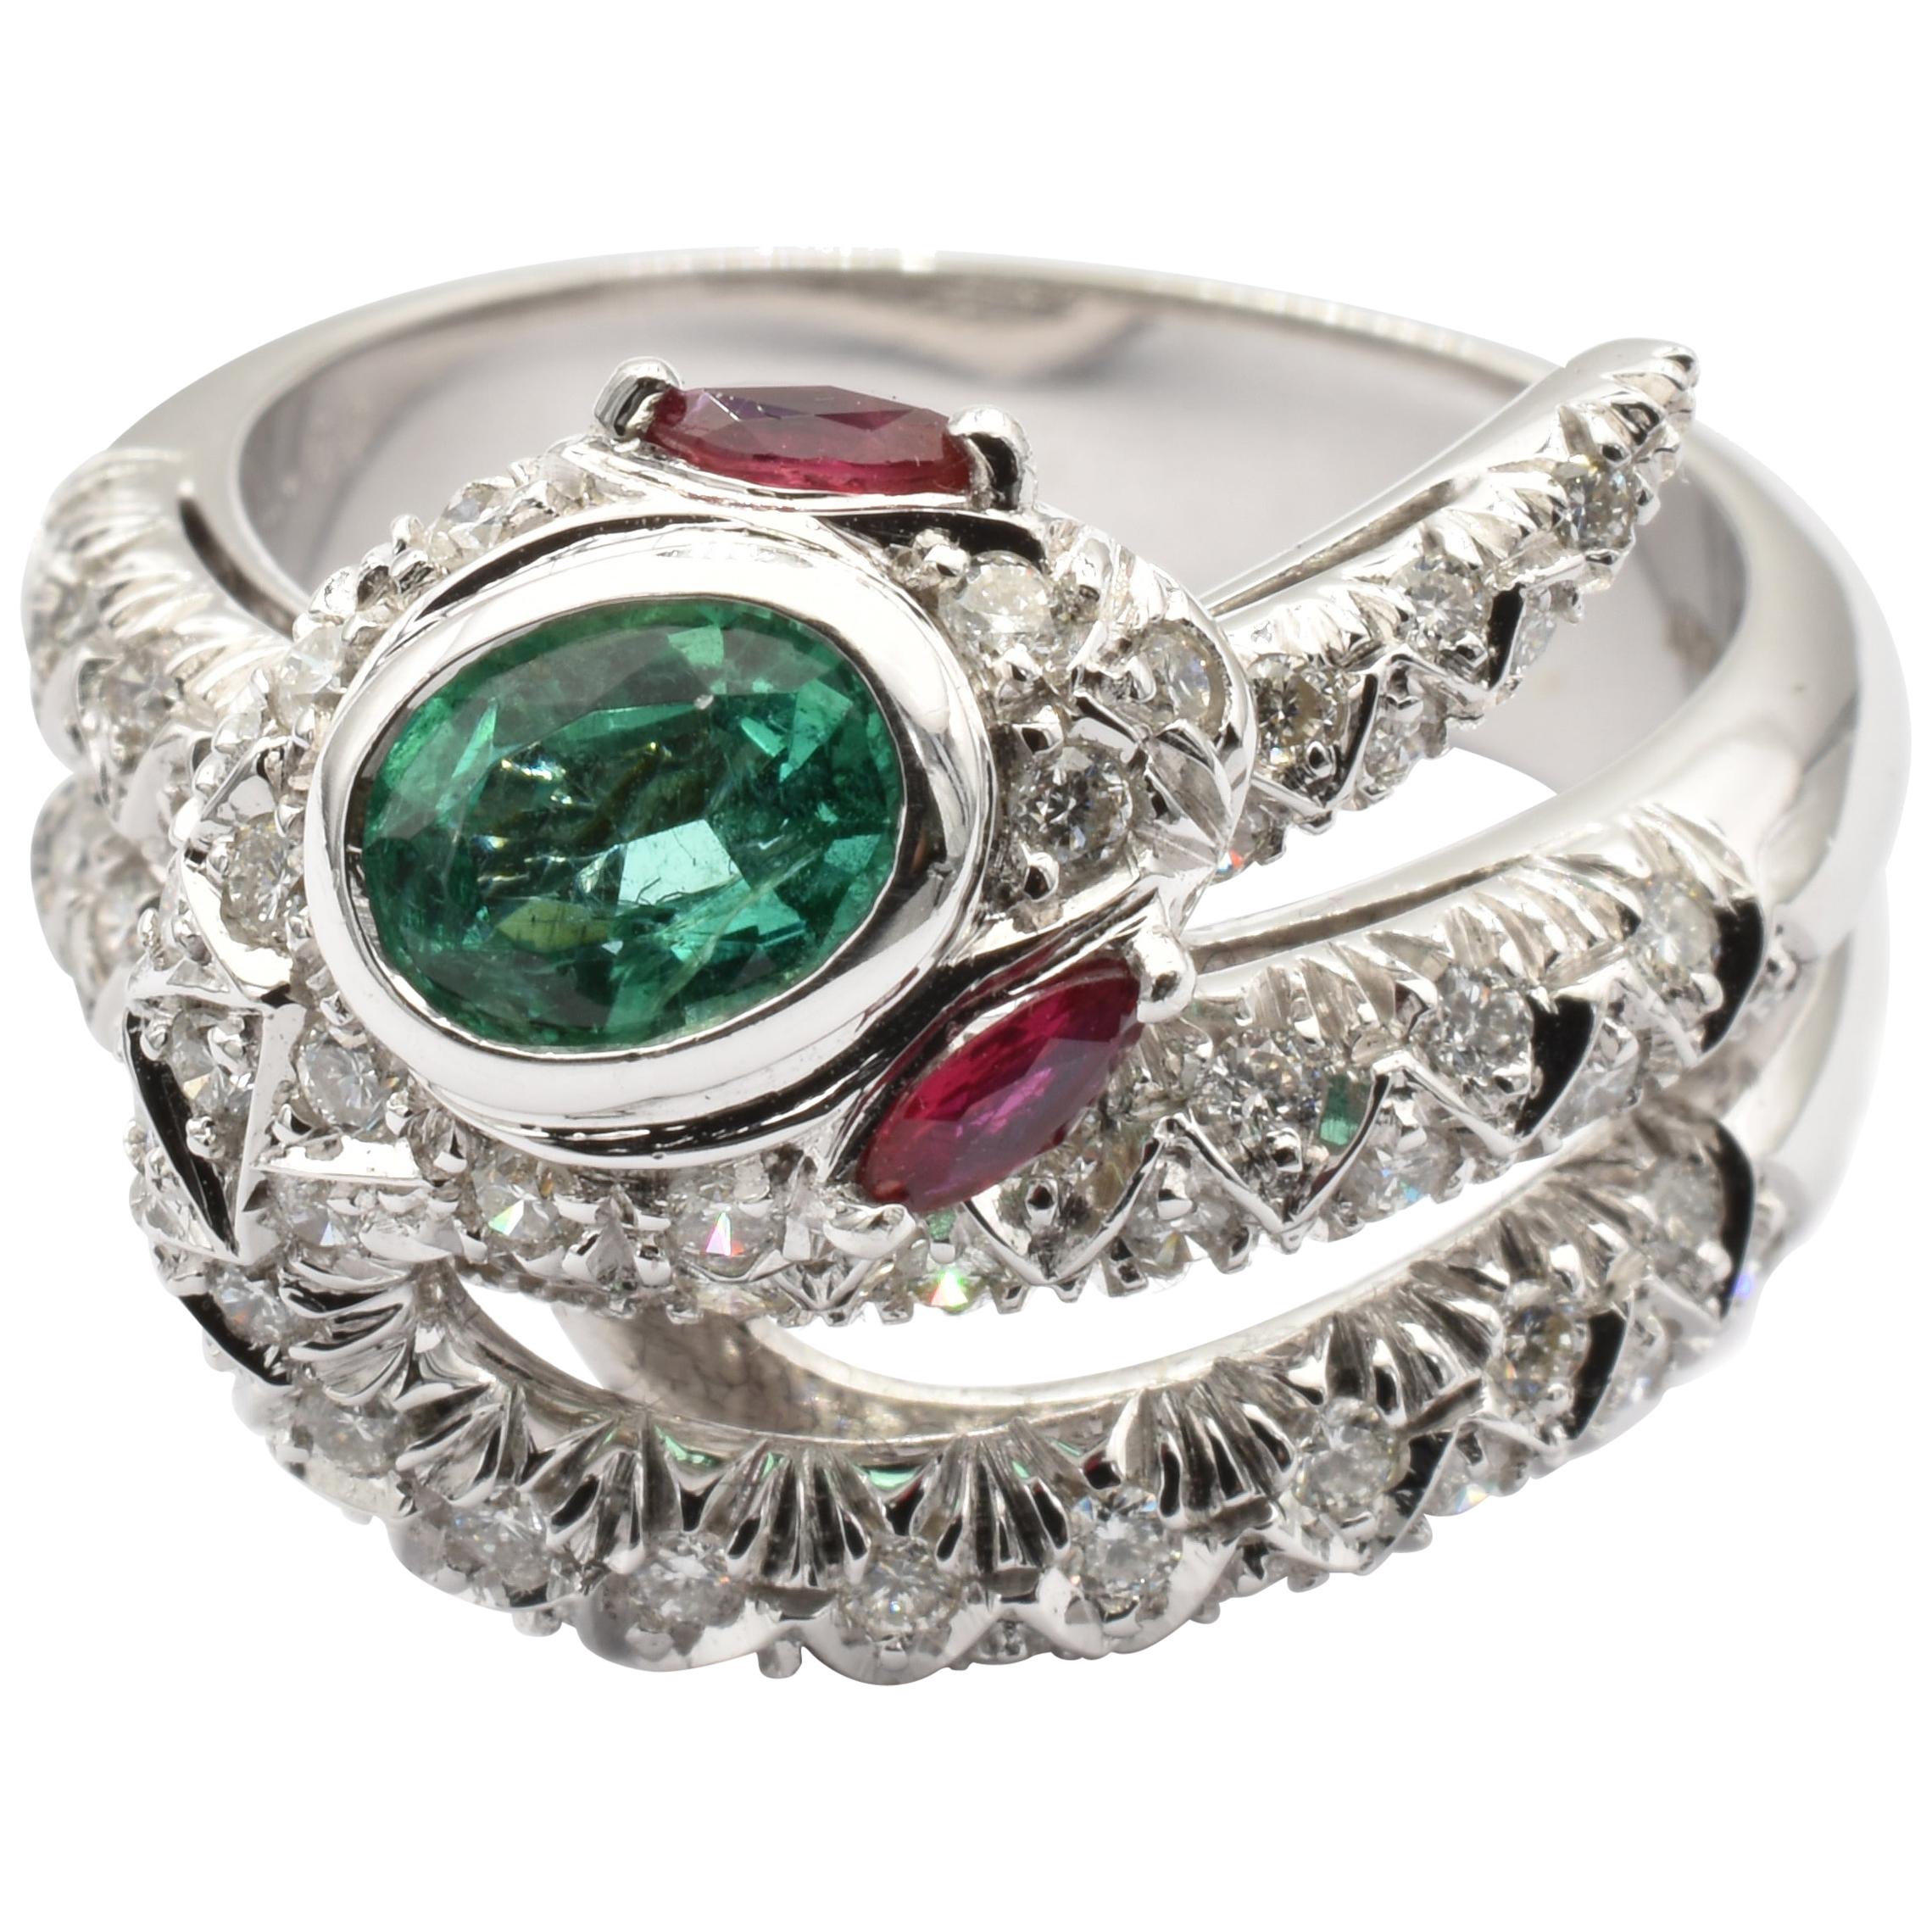 Emerald, Rubies and Diamonds White Gold Snake Ring Made in Italy For Sale